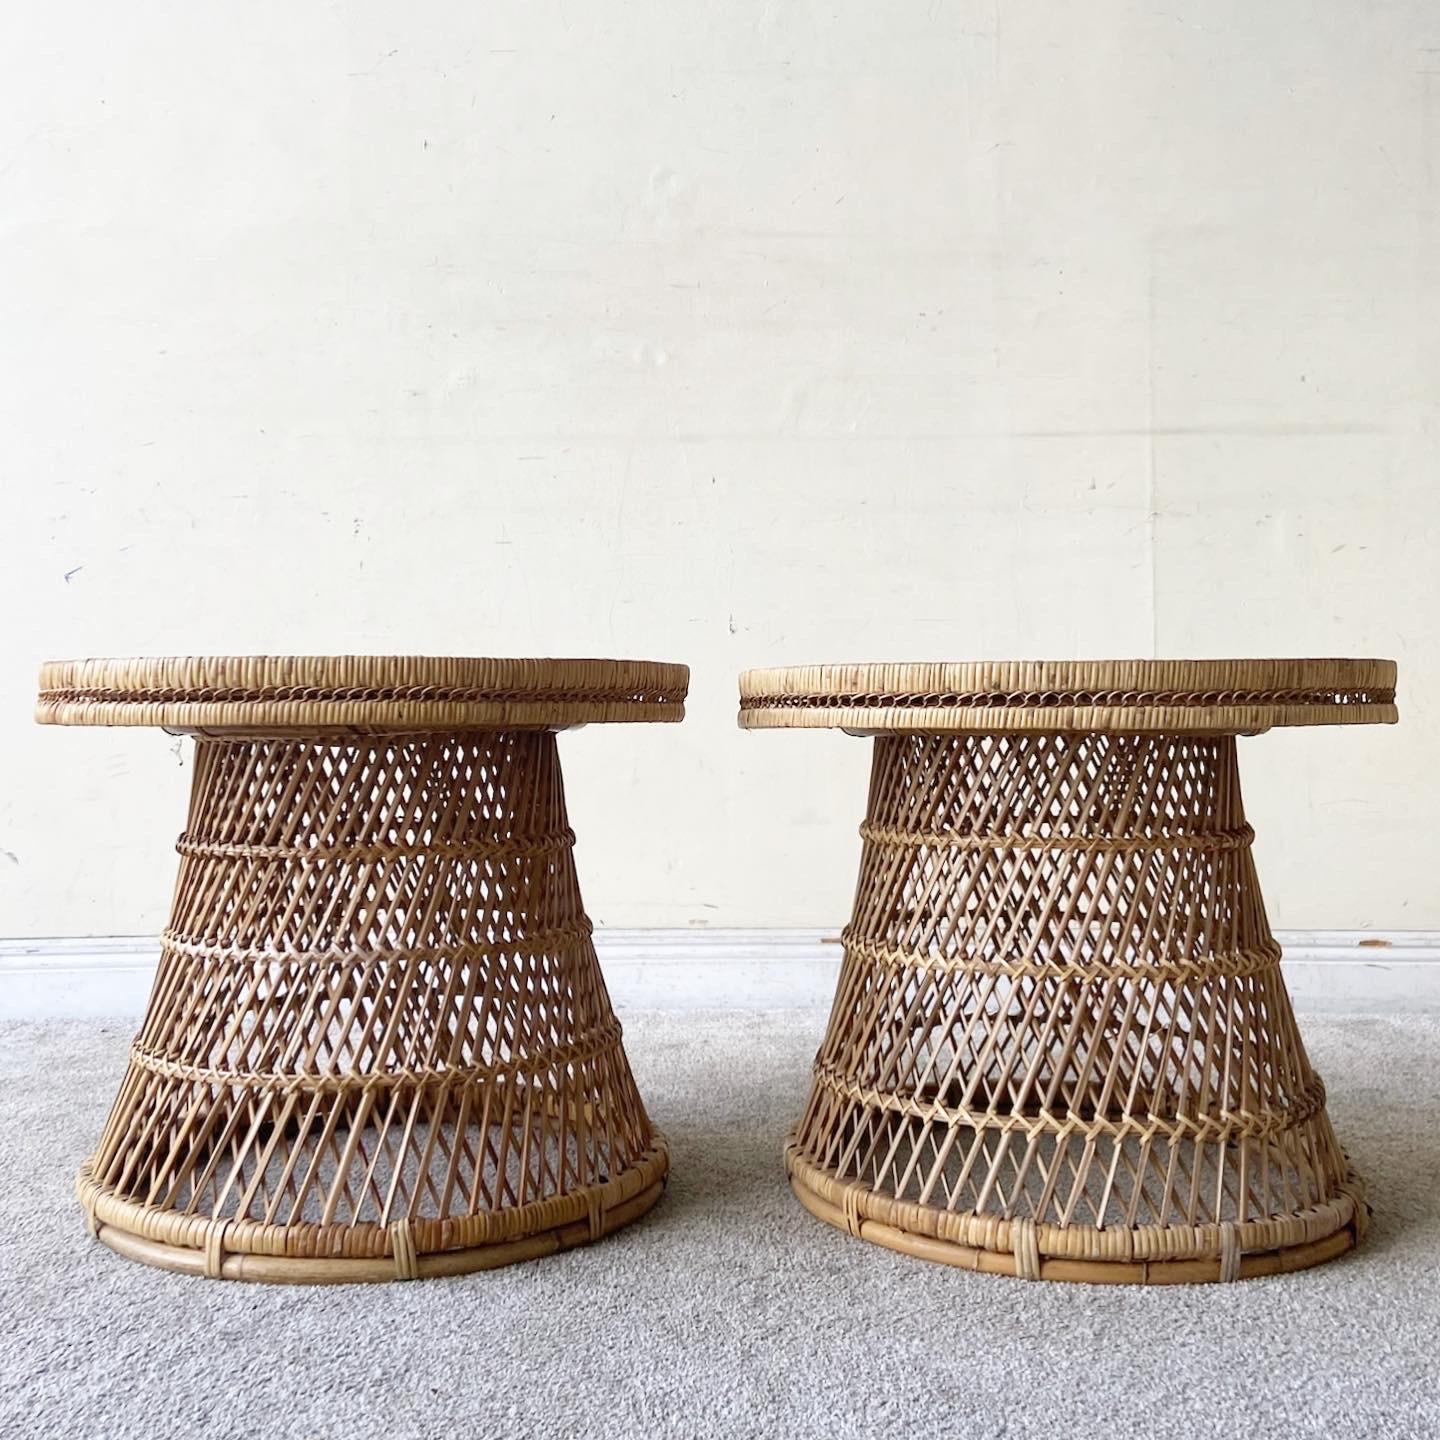 Late 20th Century 1980s Boho Chic Buri Rattan Smoked Glass Top Hour Glass Side Tables, a Pair